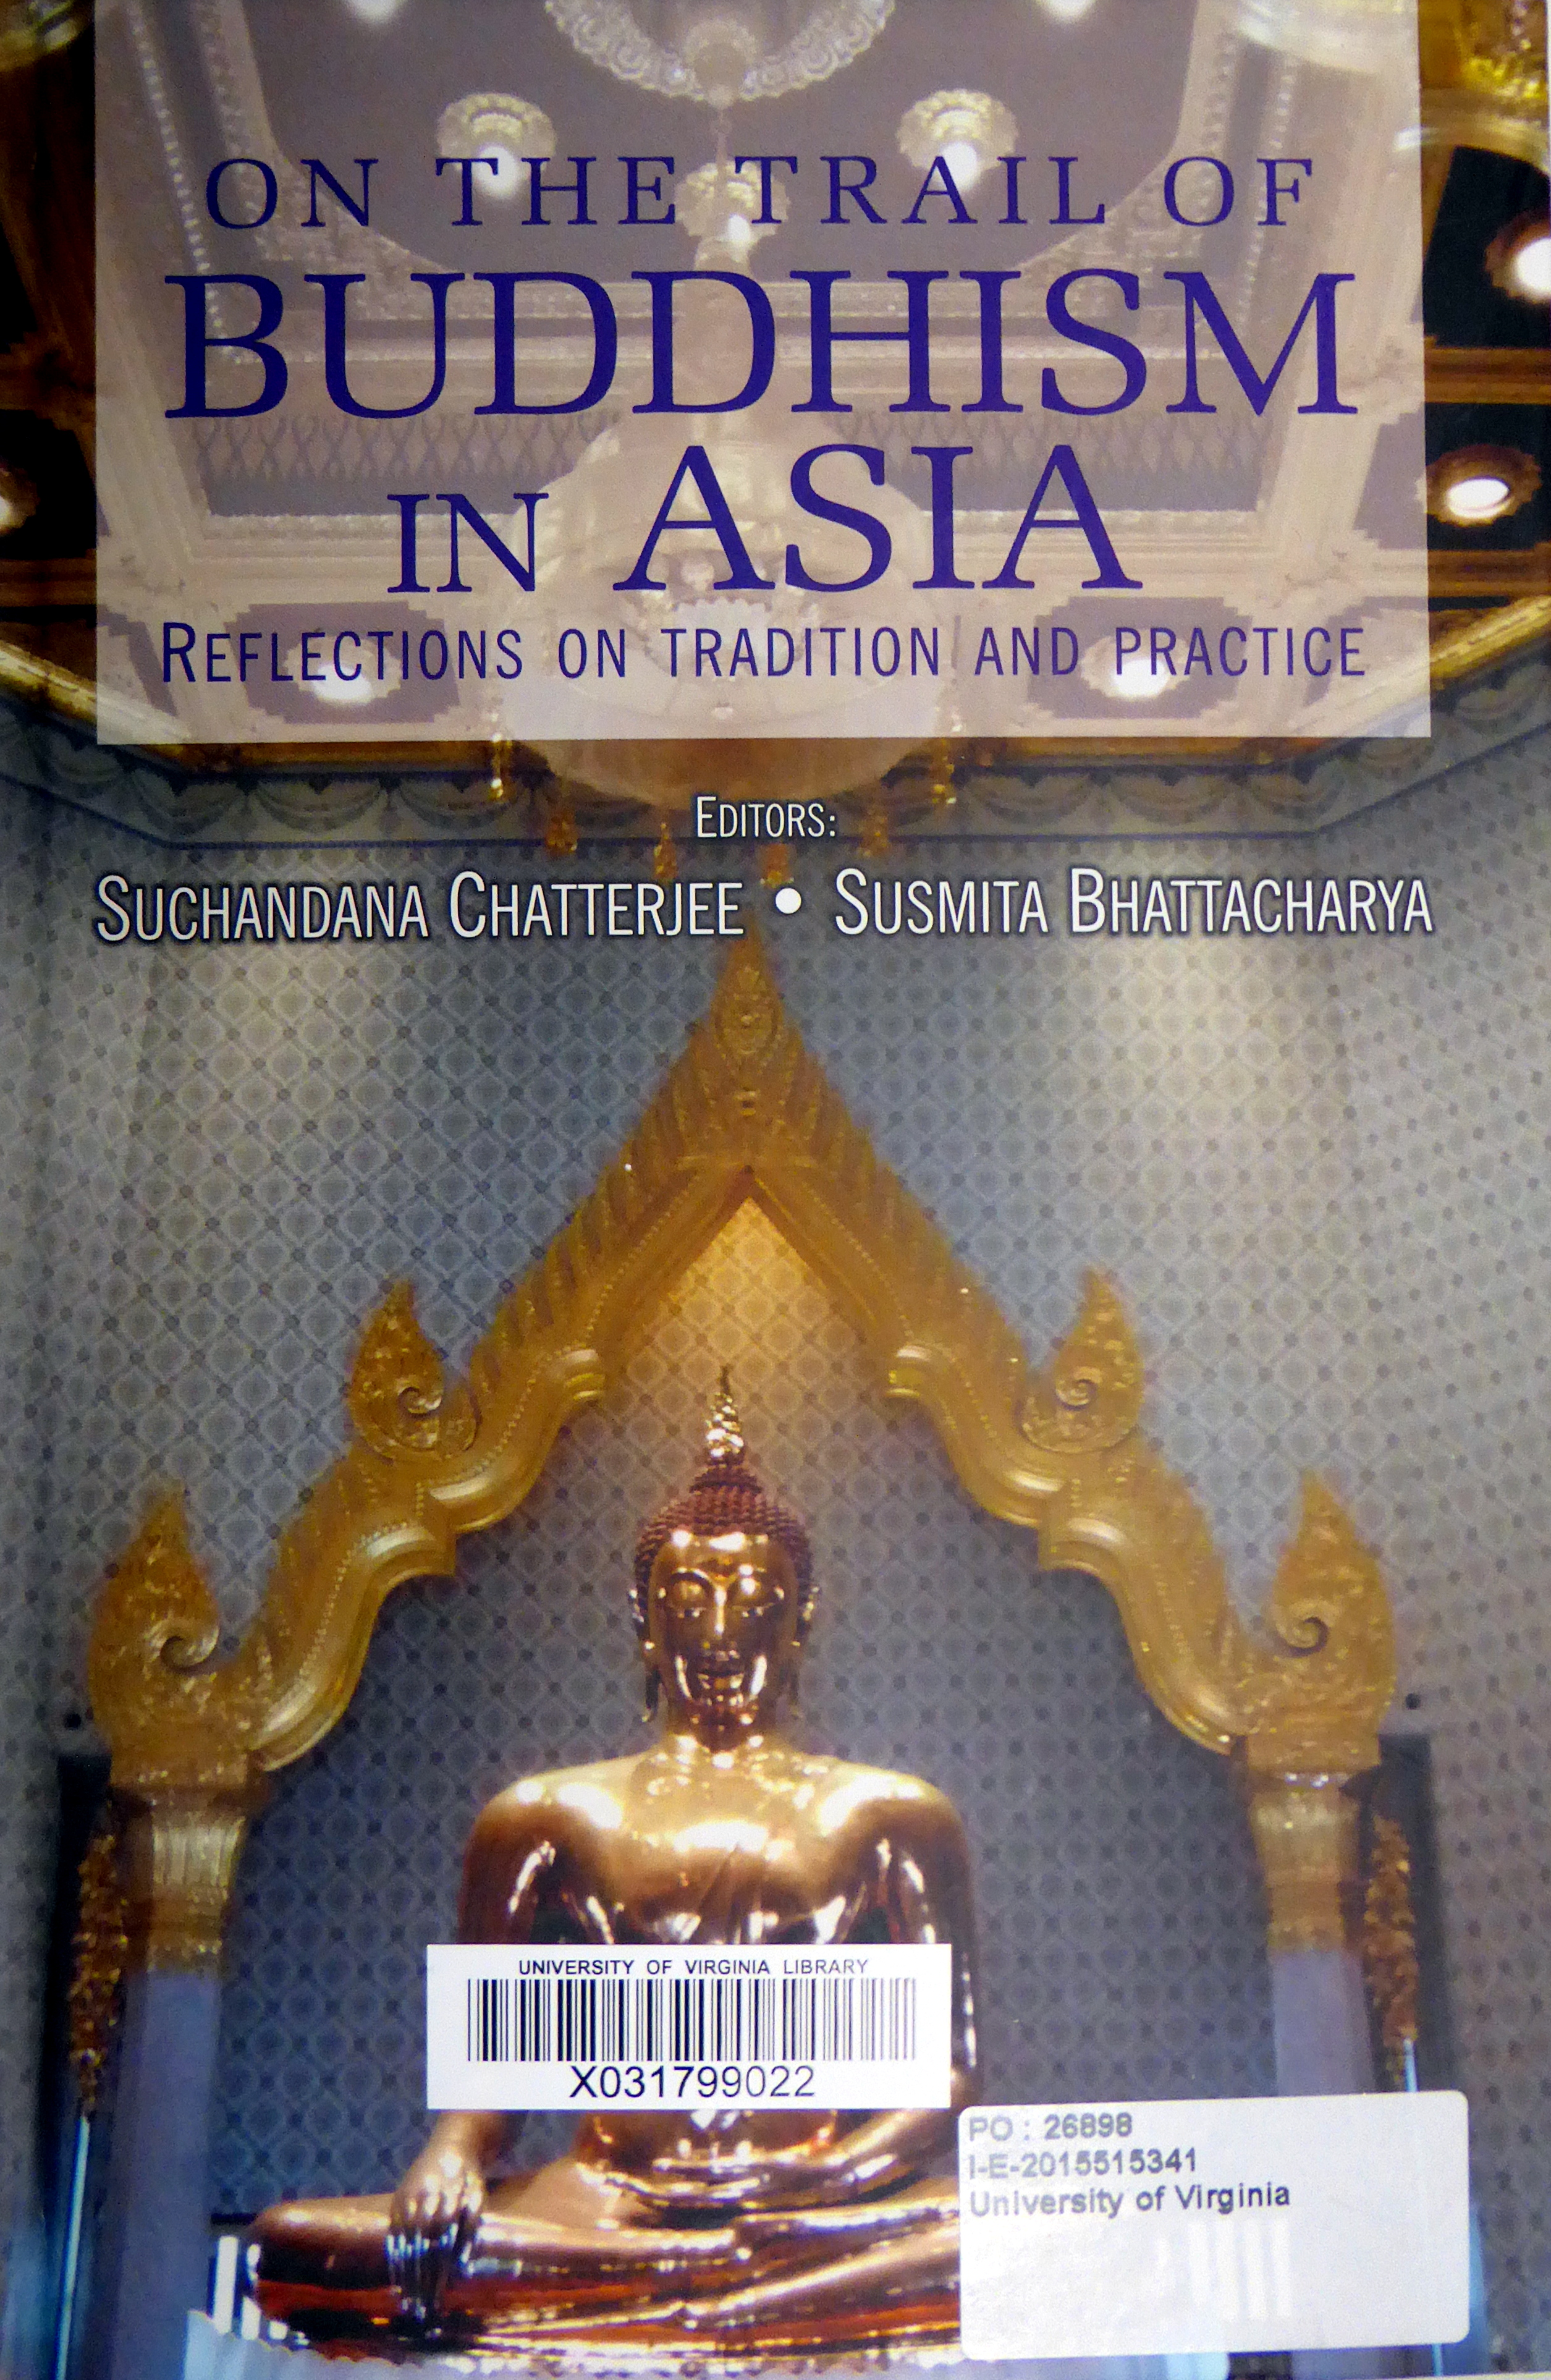 On the trail of Buddhism in Asia